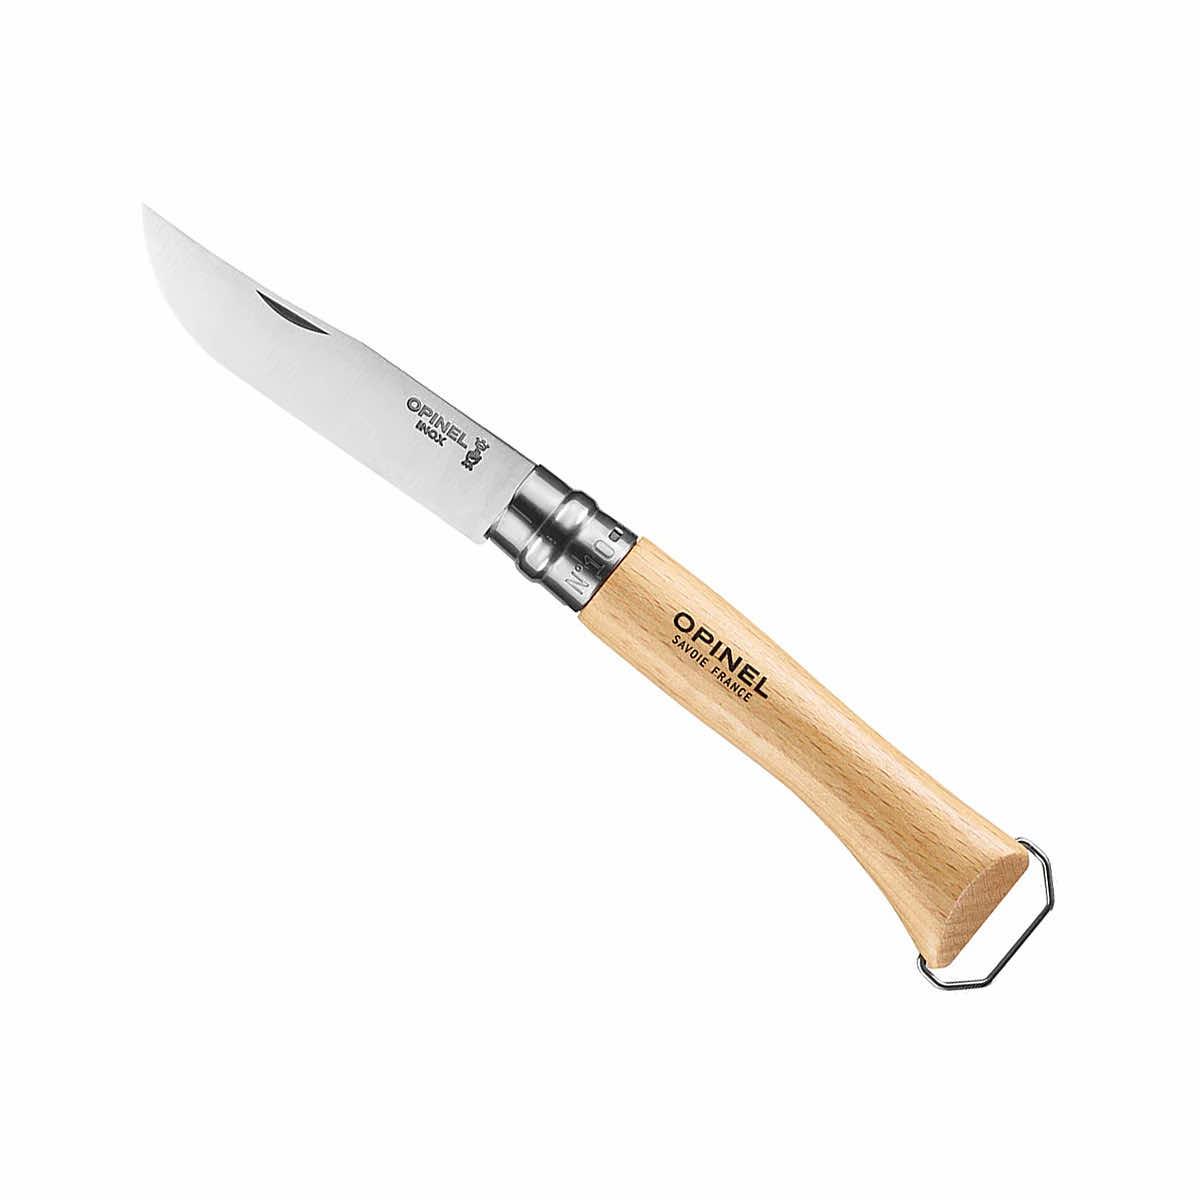 Opinel  No.10 Corkscrew Folding Knife with Bottle Opener - OPINEL USA